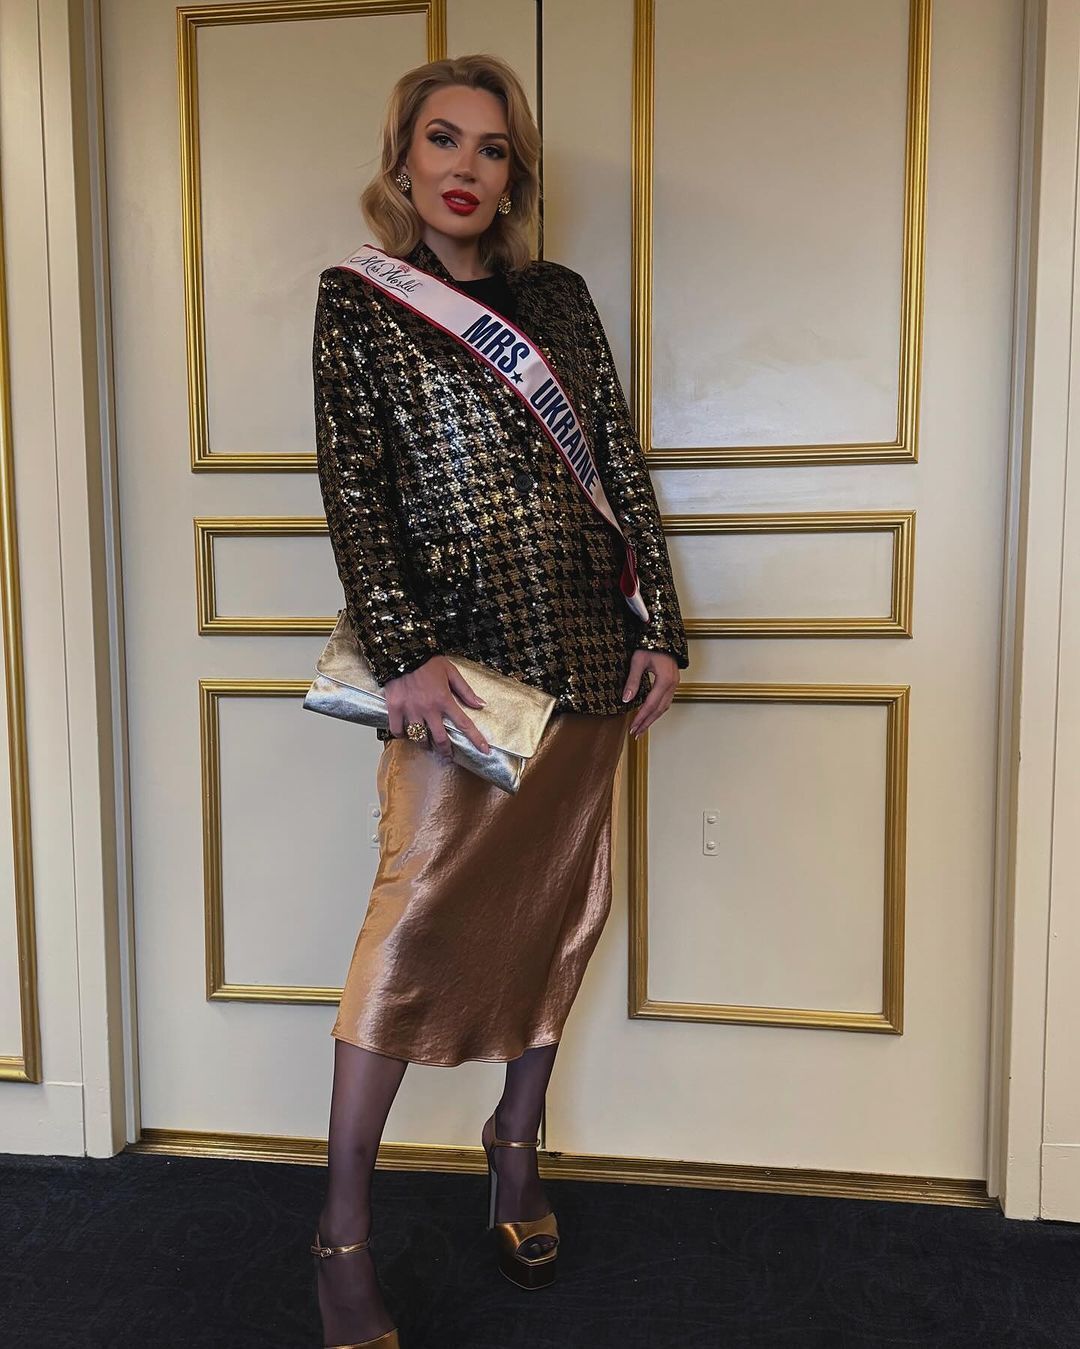 The representative of Ukraine at Mrs. World 2023 told how she made it clear to Russian women without words that they should not even try to befriend her